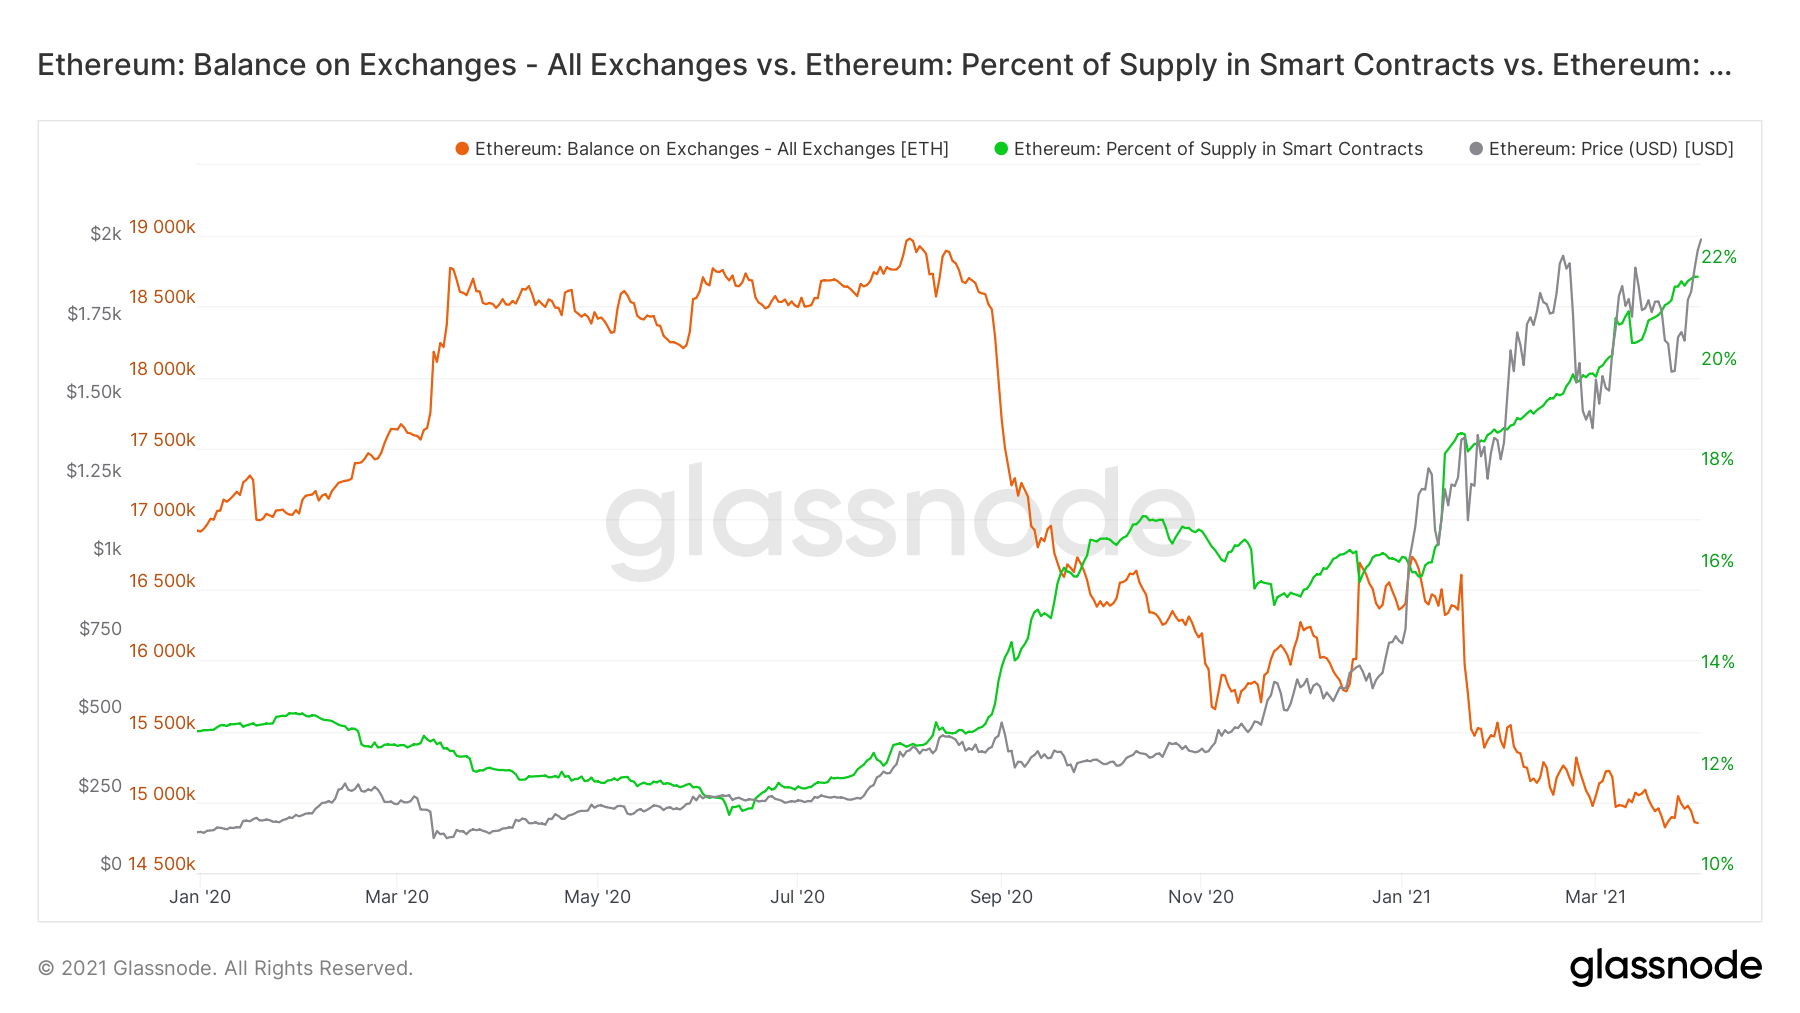 ETH Balance on Exchanges vs. Supply in Smart Contracts. Источник: Glassnode